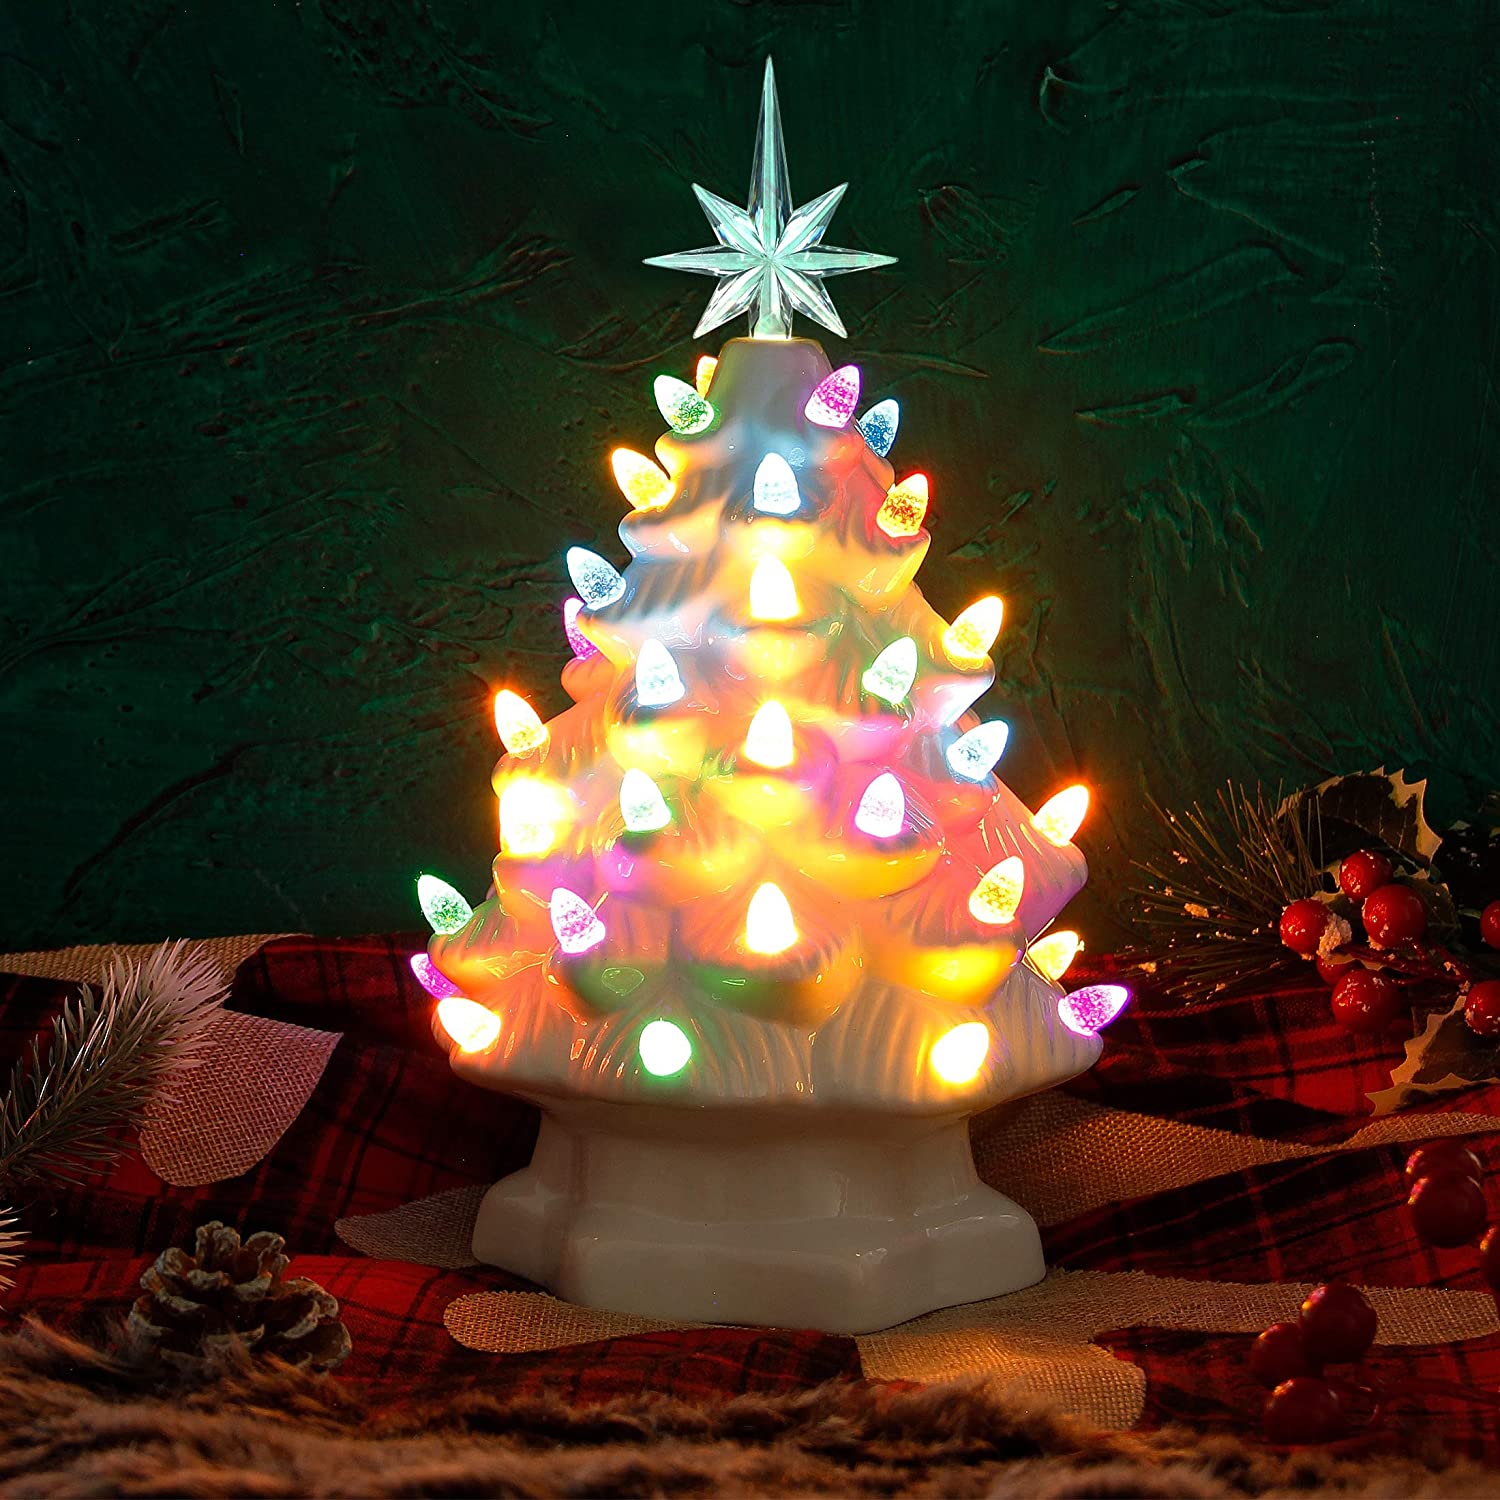 Lulu Home Ceramic Christmas Tree, 10 Inch LED Light Up Ceramic Tabletop Christmas Tree with 54 Multicolored Lights and a 7 Point Star Topper, White Mini Vintage Lighted Ceramic Tree for Tabletop